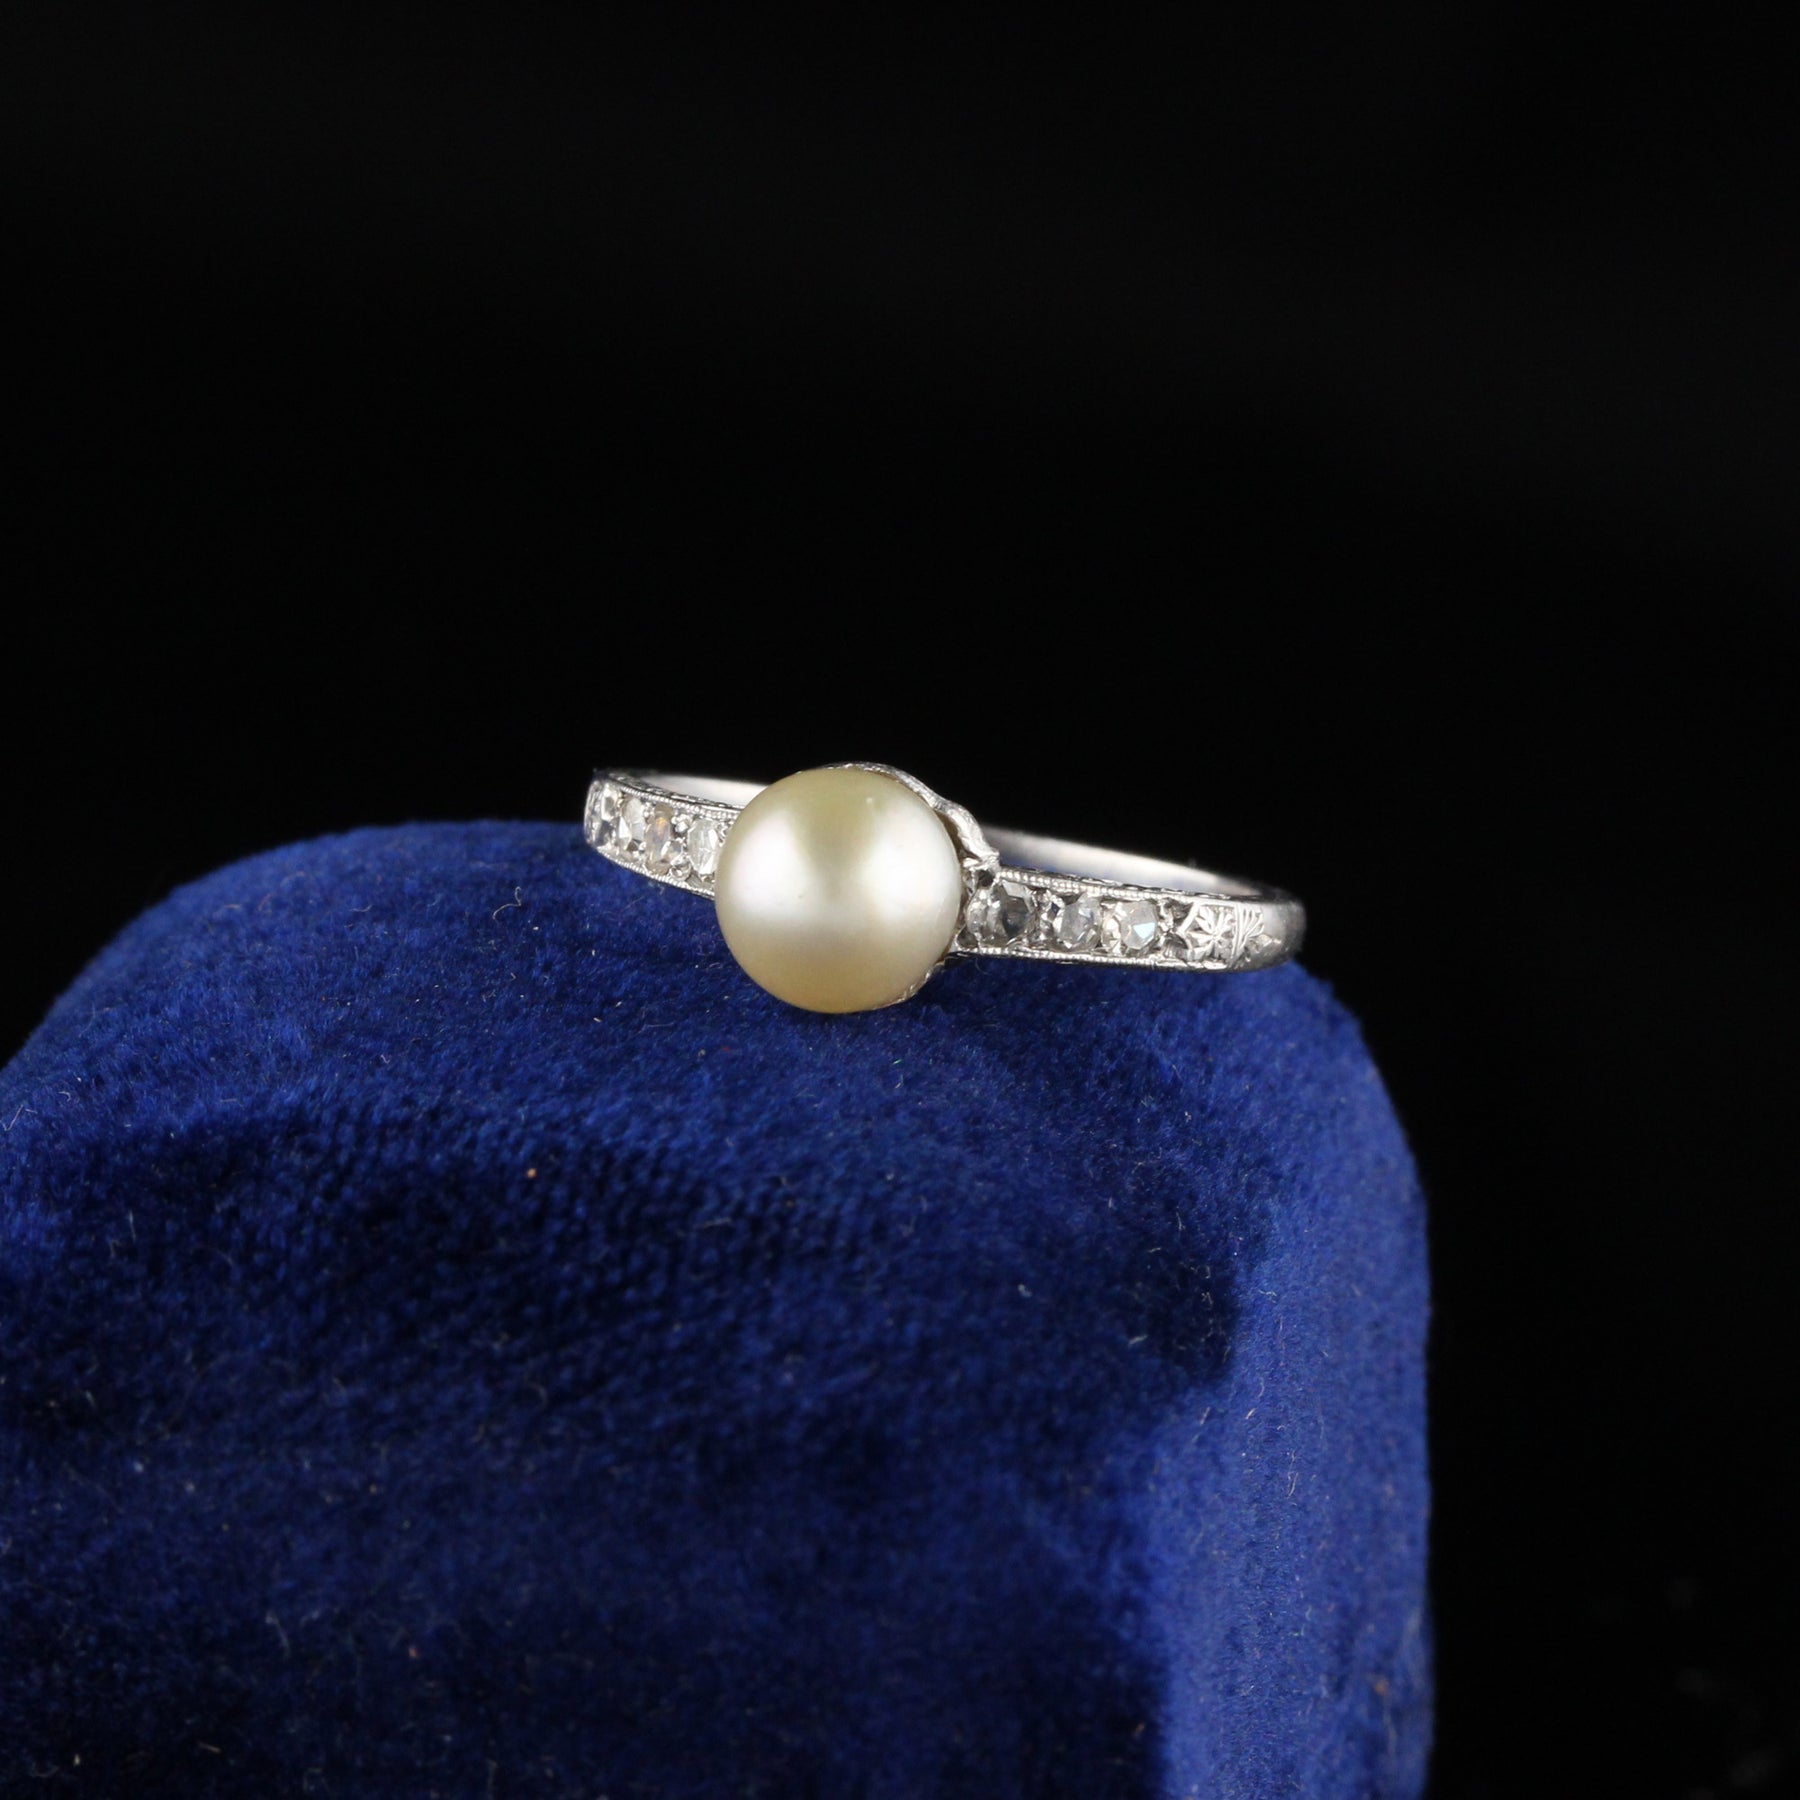 14K Yellow Gold 7mm Pale Blue Possible Natural Pearl Ring Size 7 Circa 1970  - Colonial Trading Company